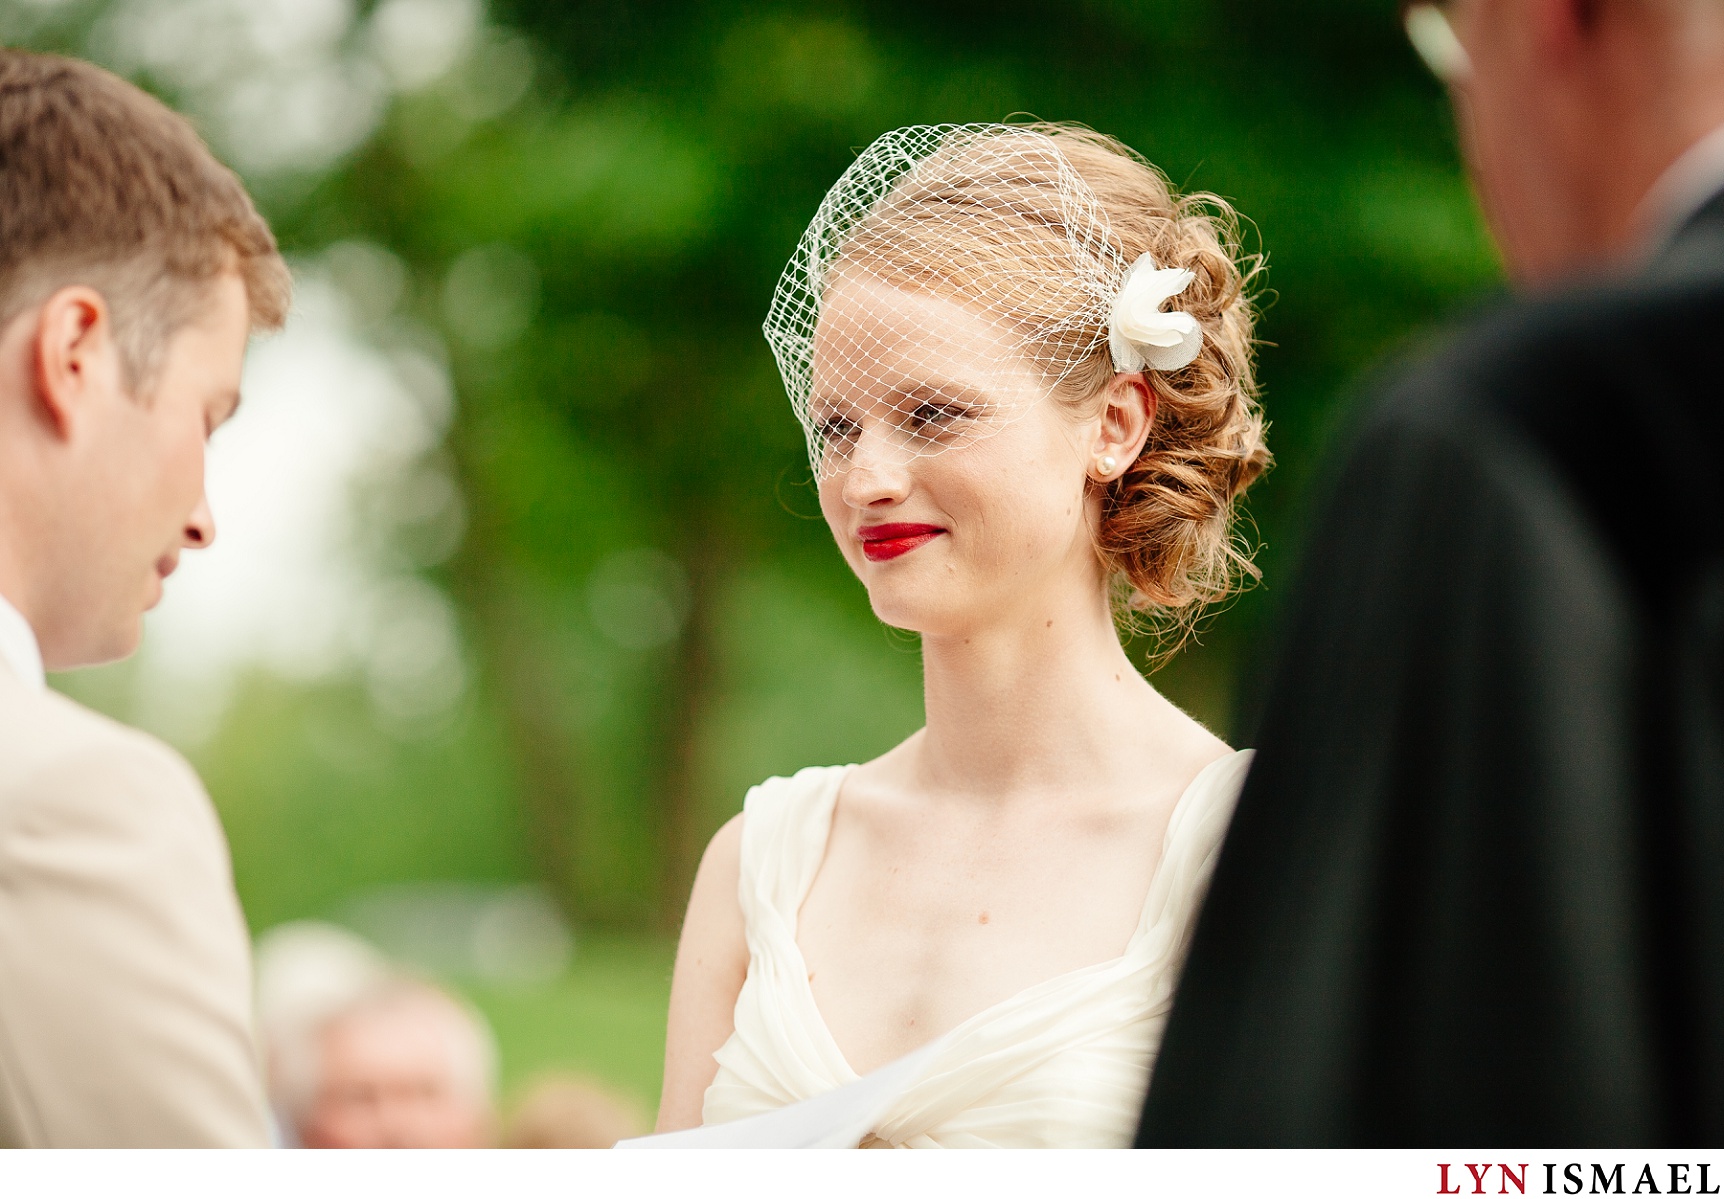 Beautiful bride listens to her groom's vows.